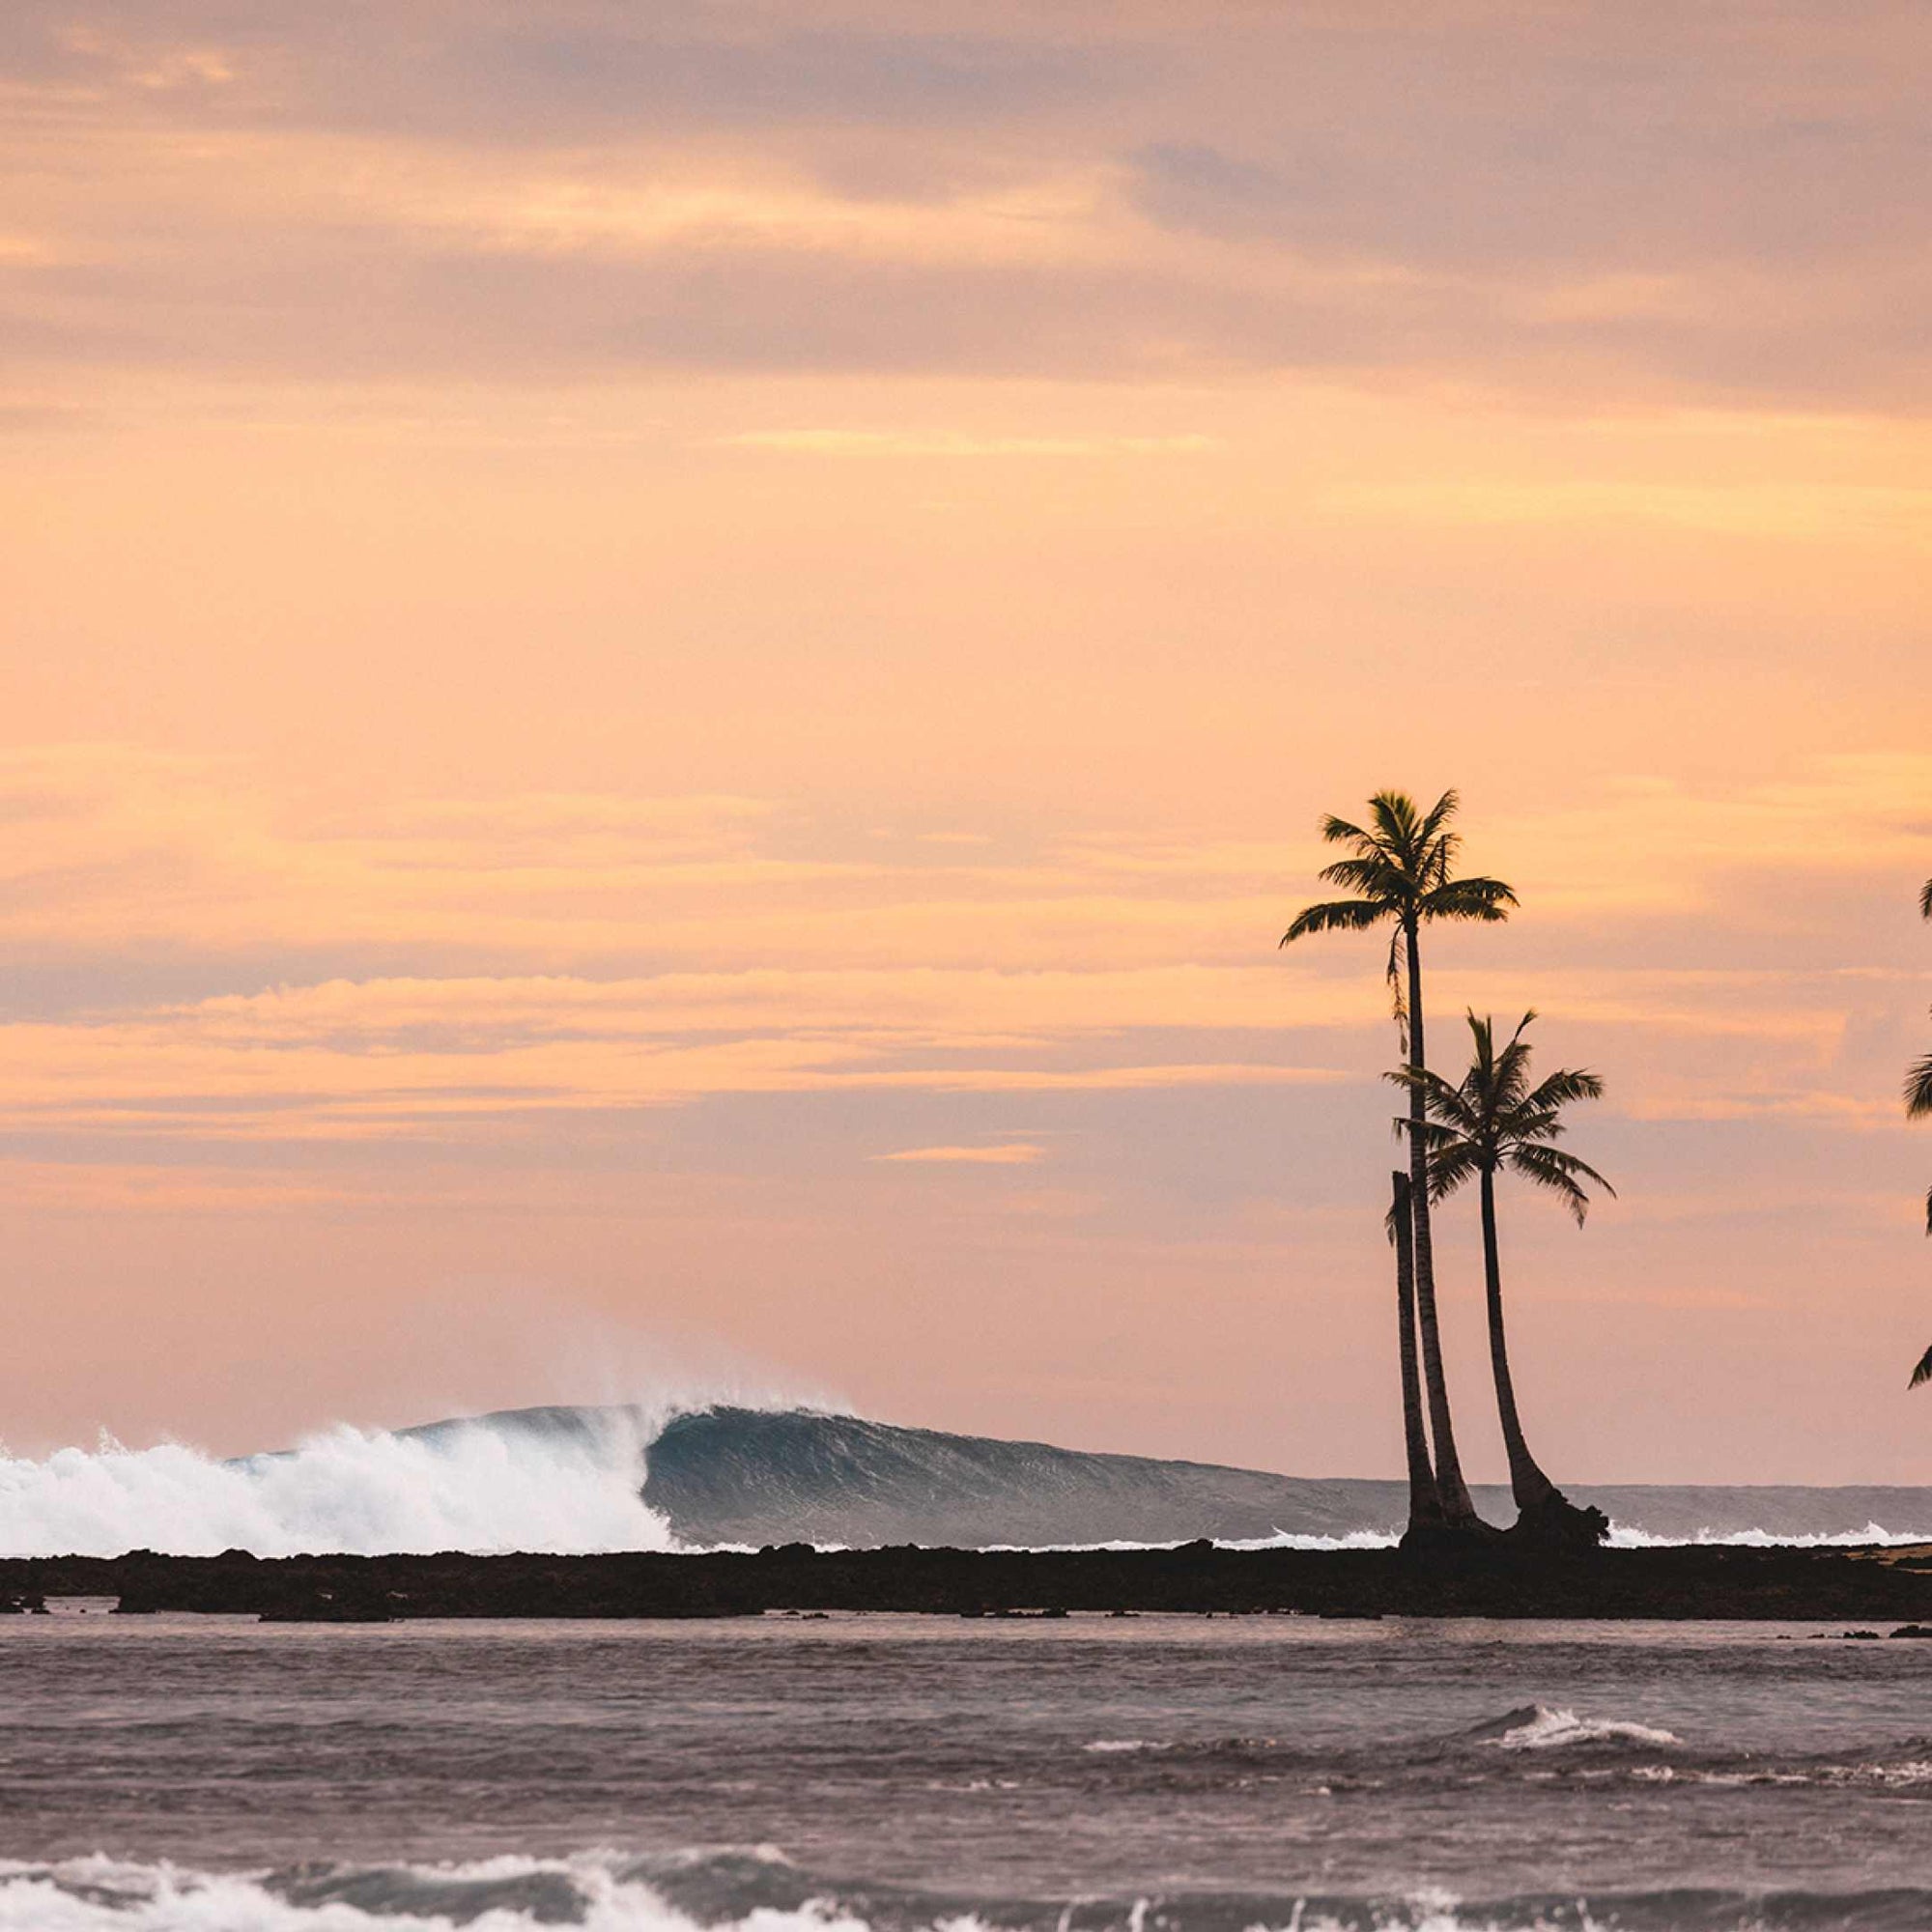 A wave breaking at sunset with some palm trees silhouetted in the foreground